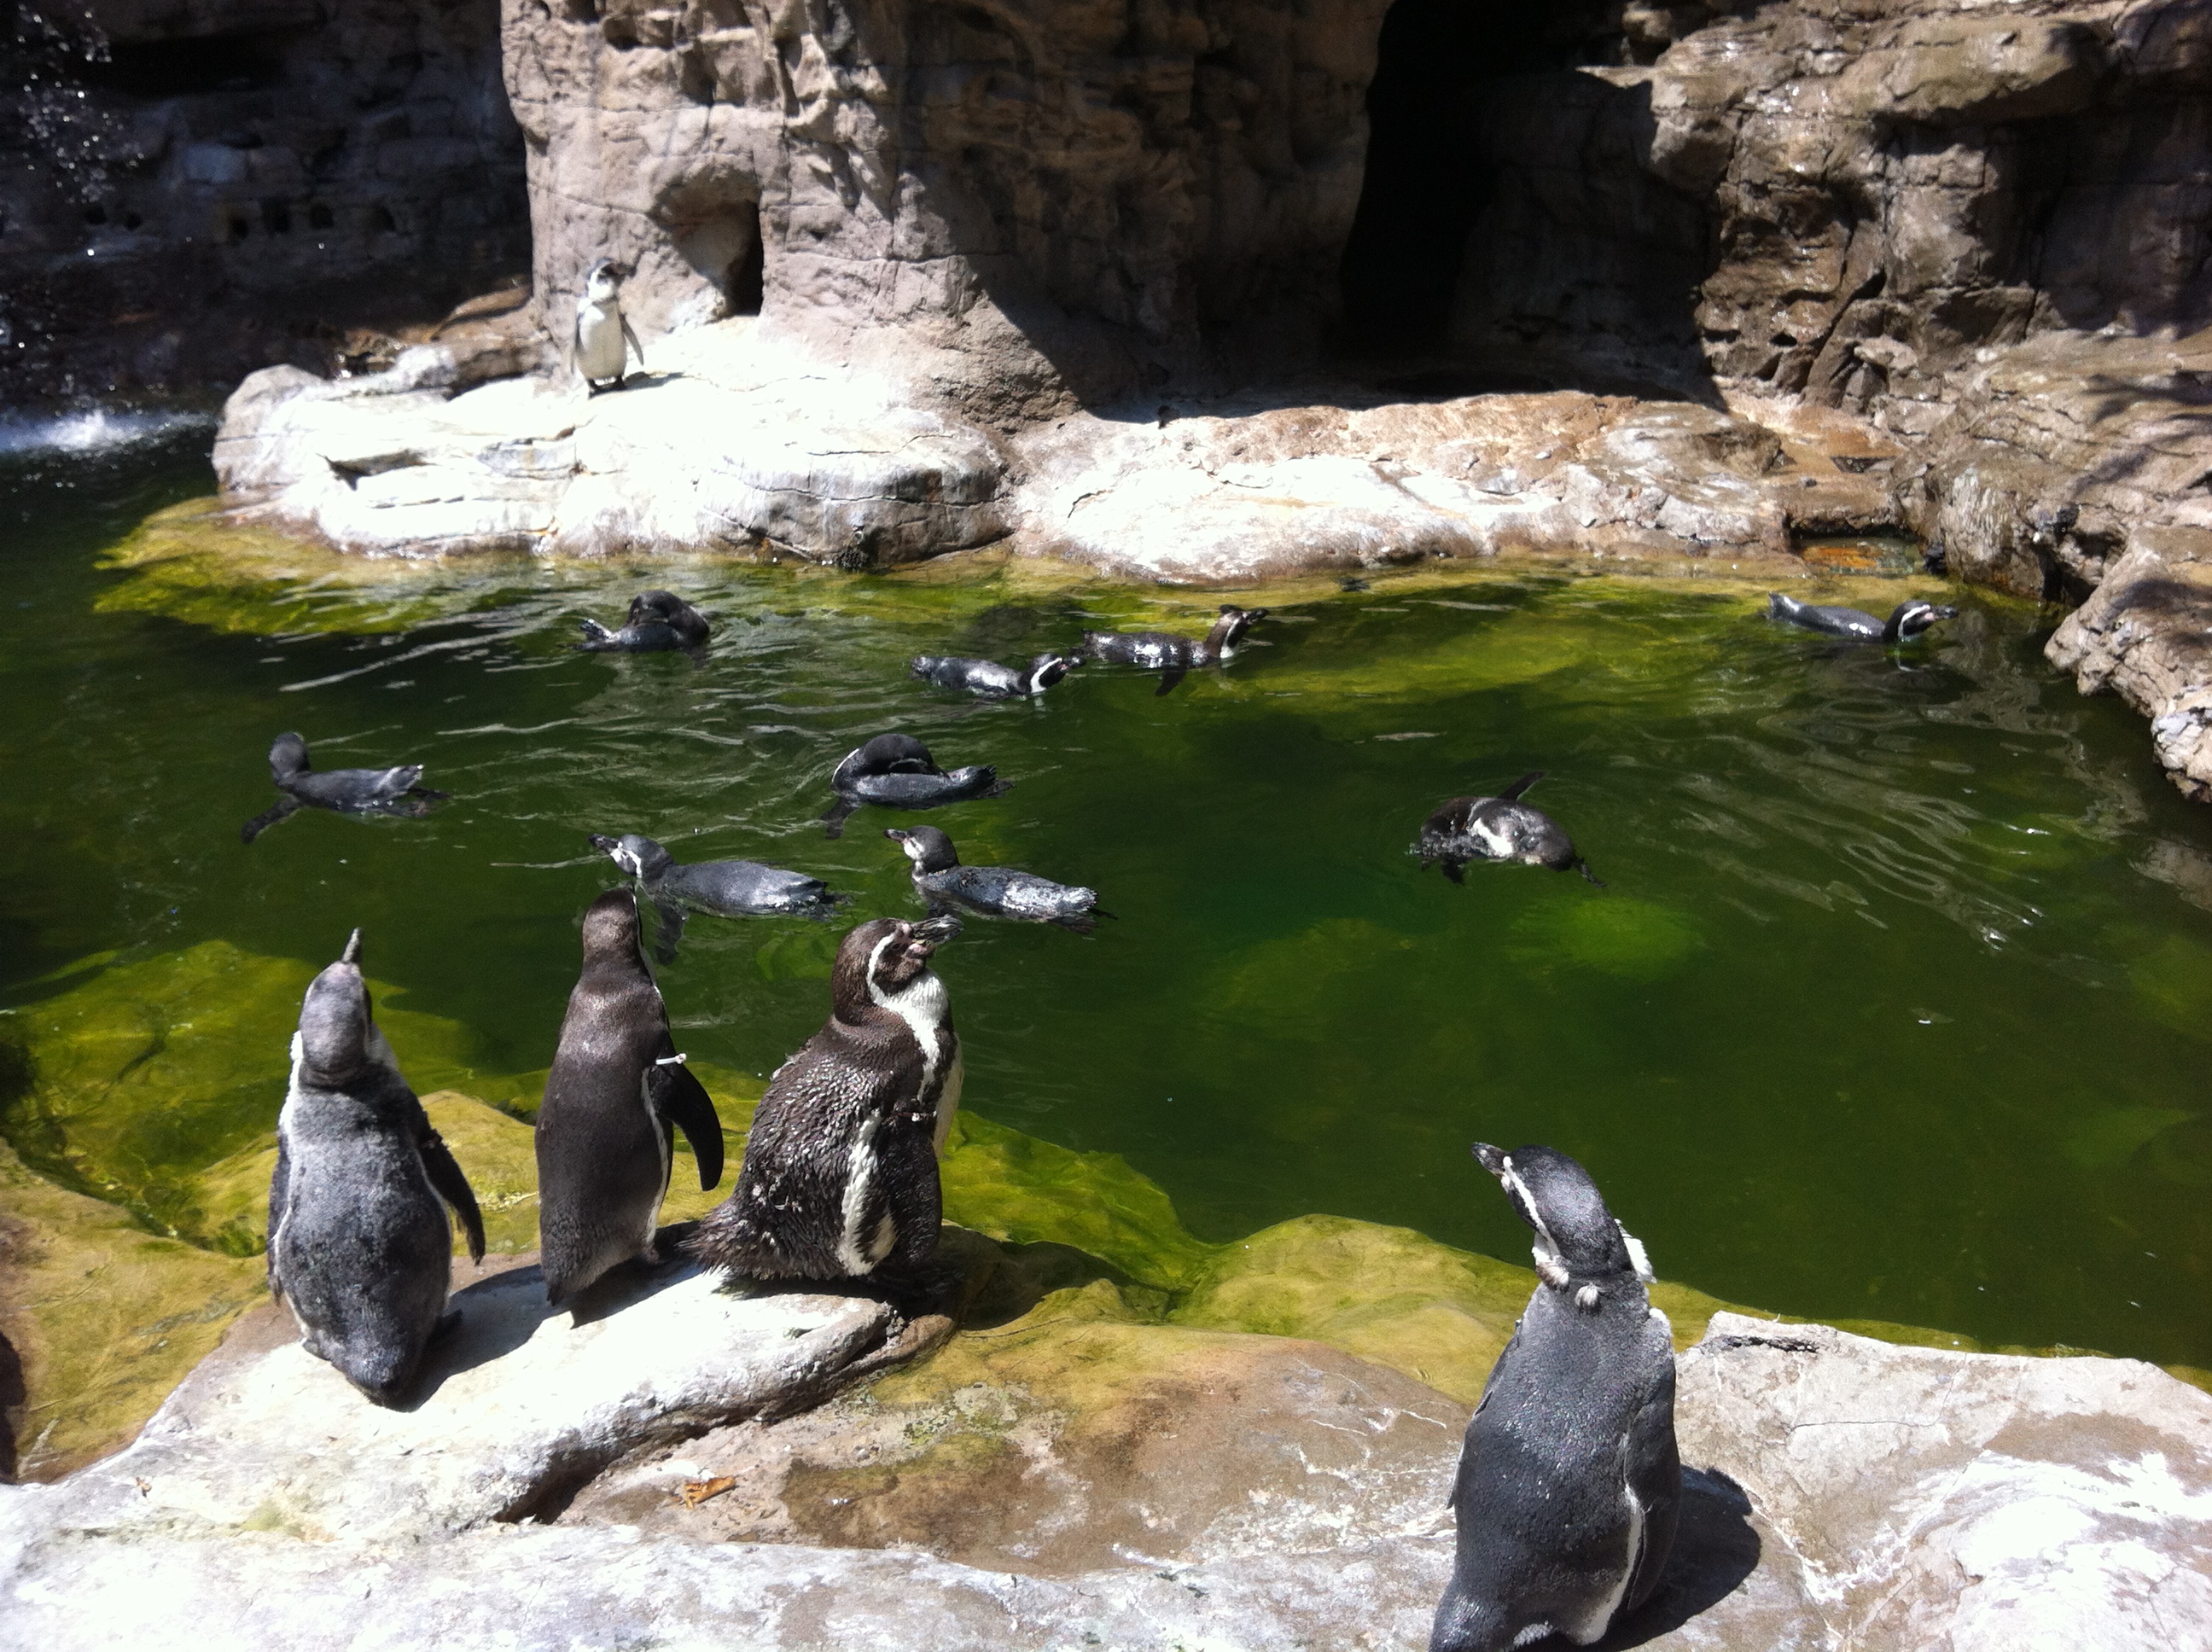 St. Louis Zoo to temporarily close penguin, puffin exhibit | KBIA